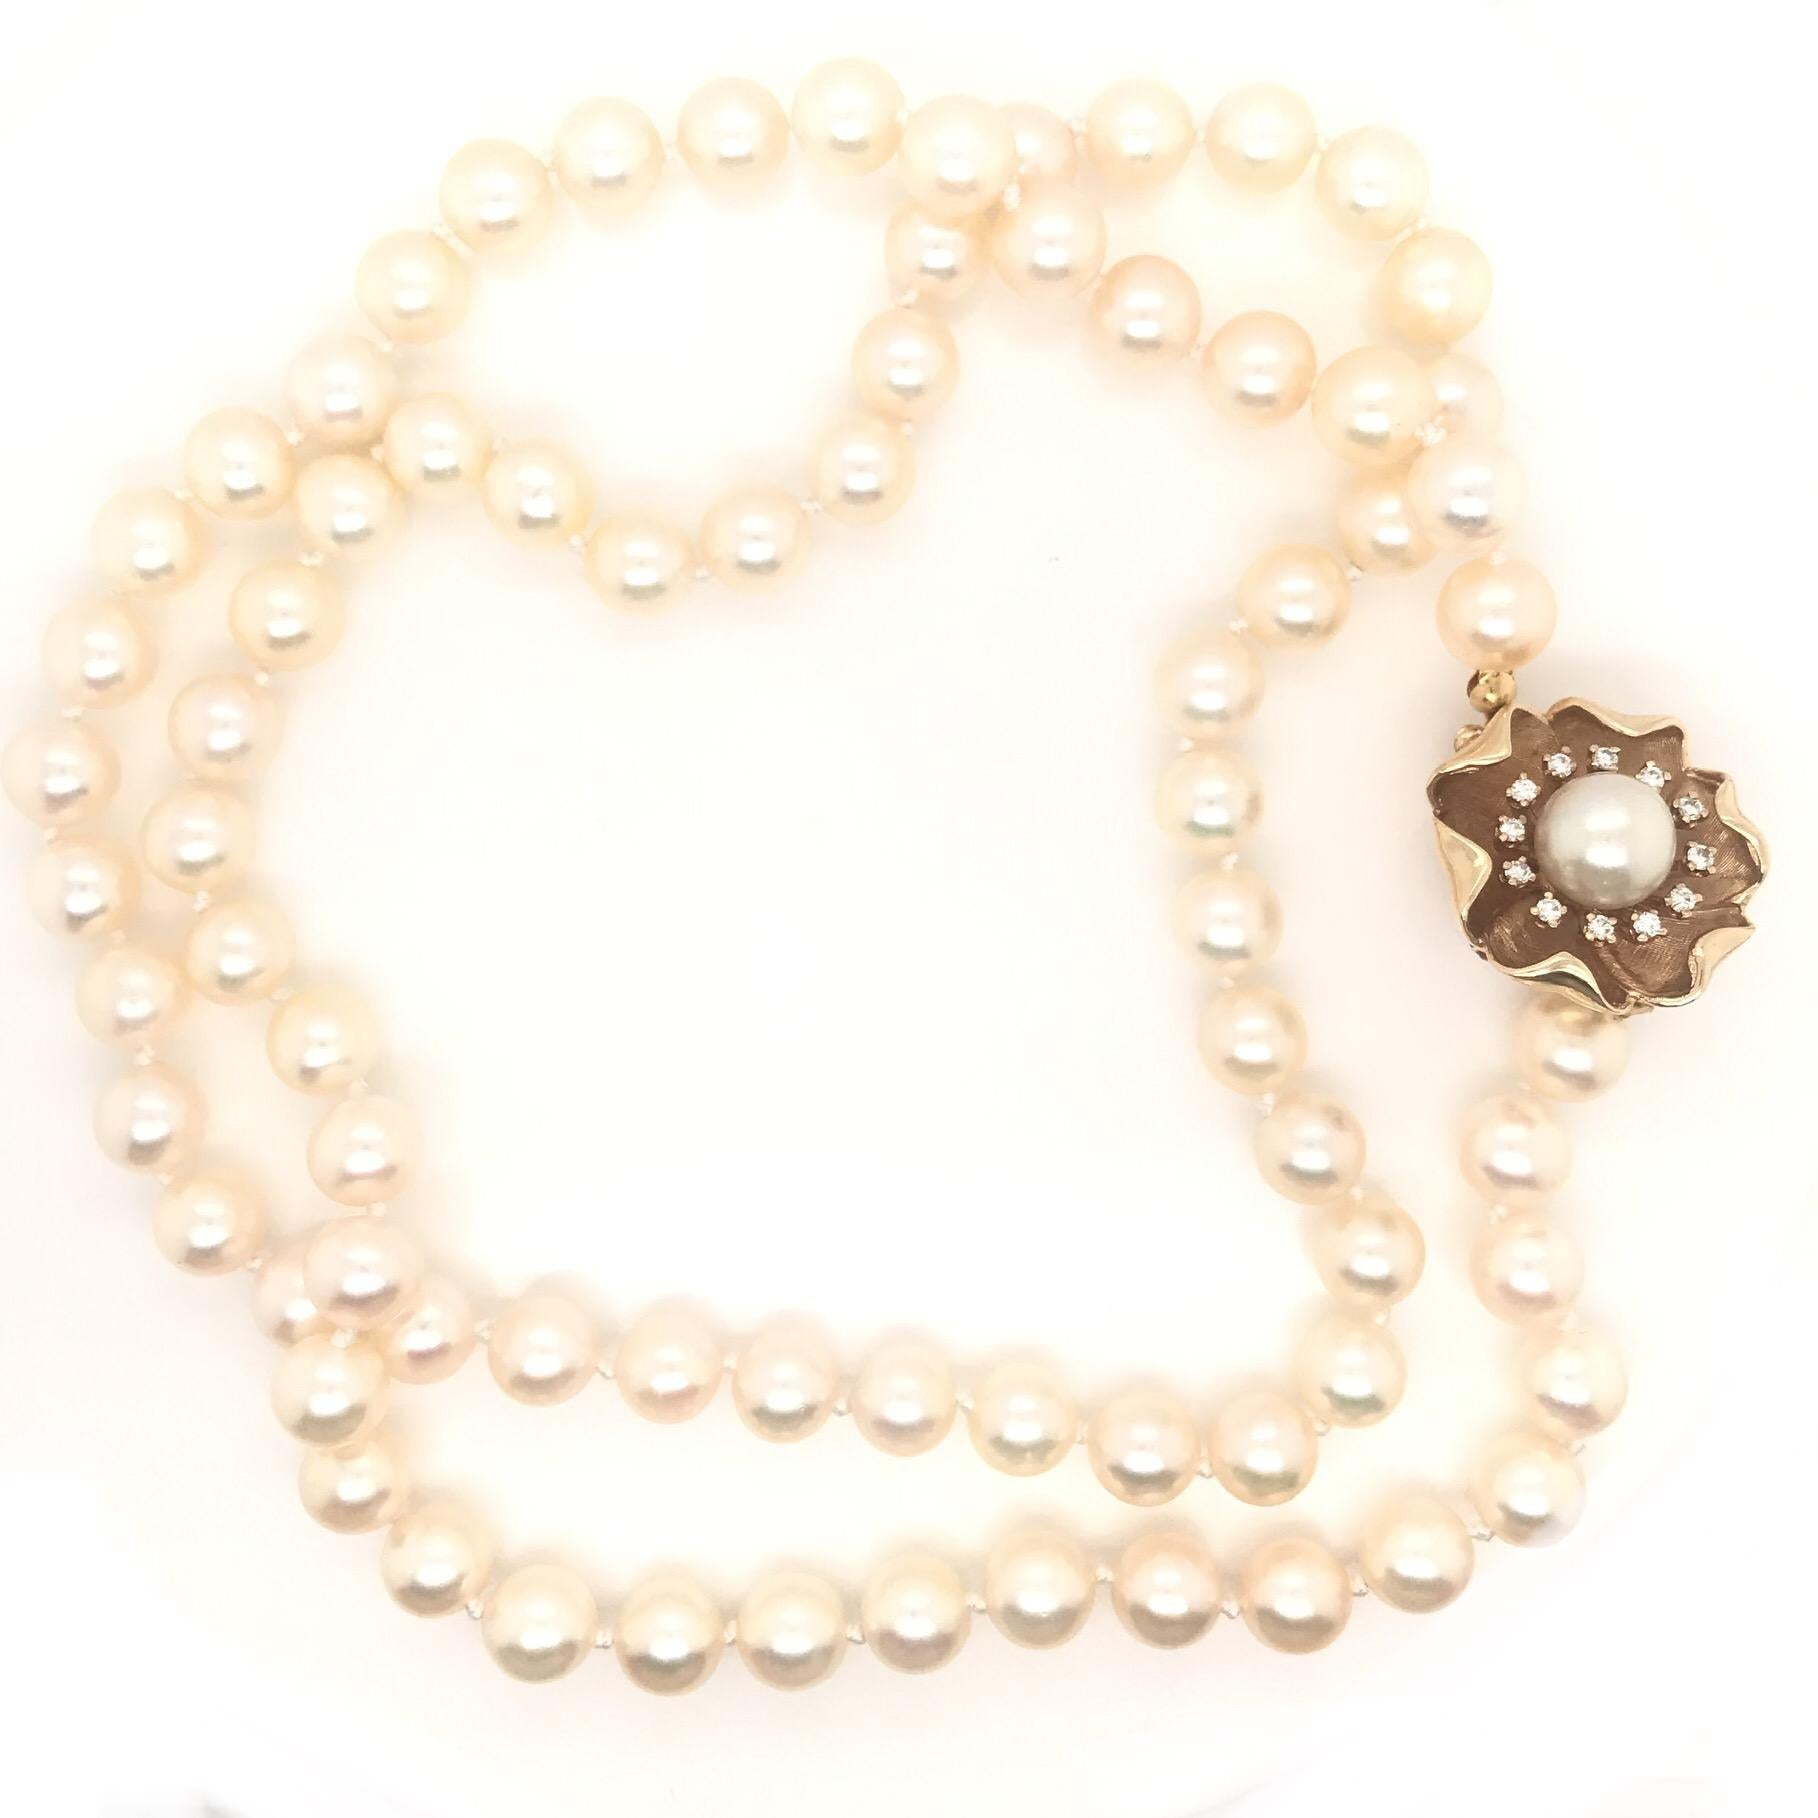 A Strand Of 8 MM Cultured Pearls With Diamond Clasp